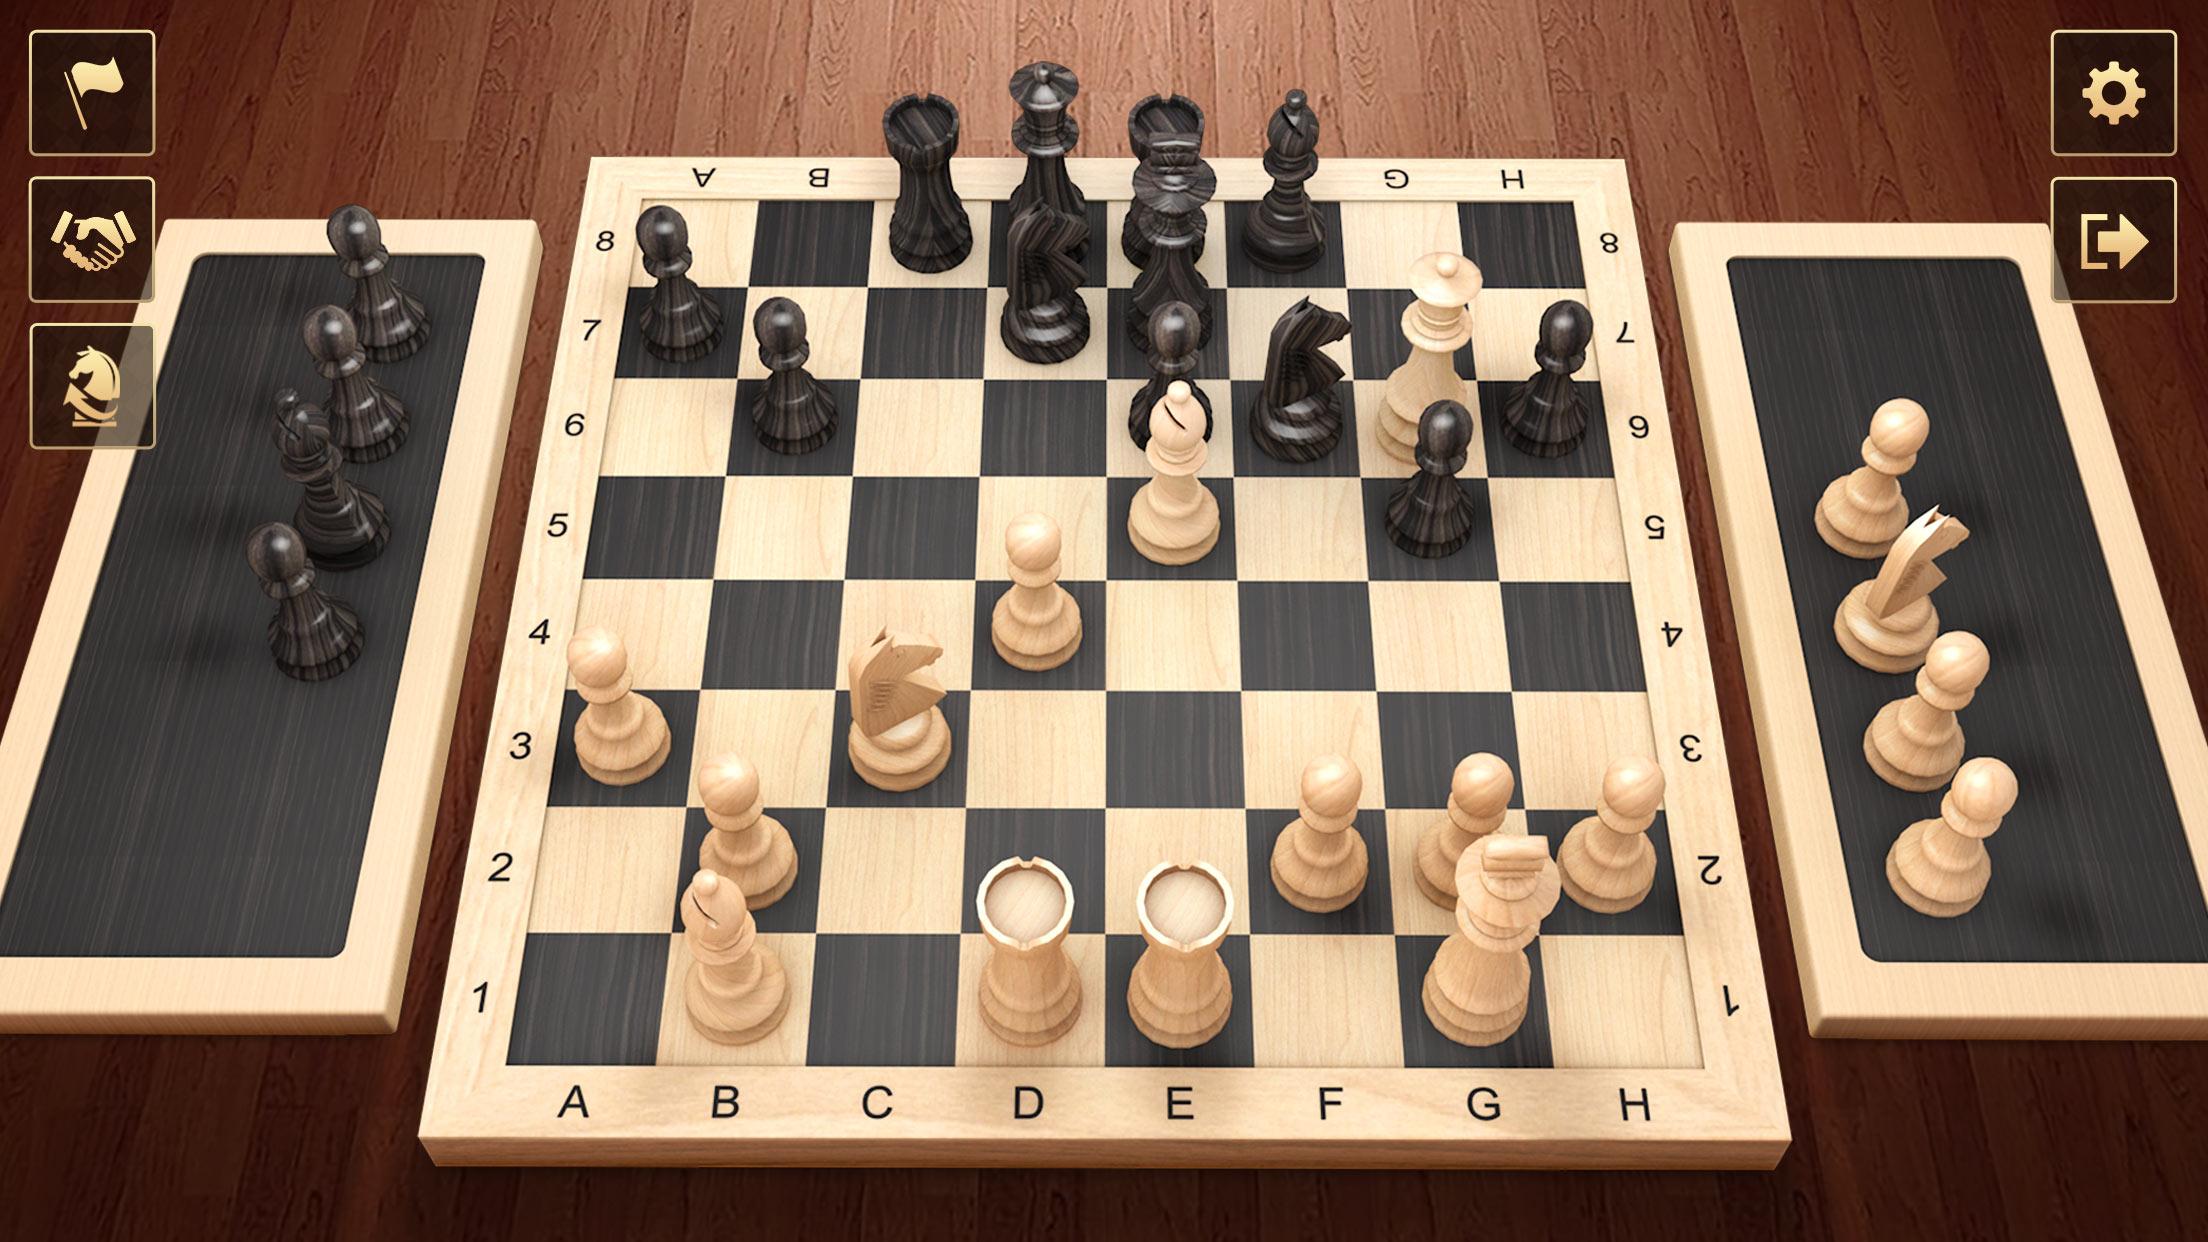 Checkmate in 3 Moves PDF, PDF, Abstract Strategy Games